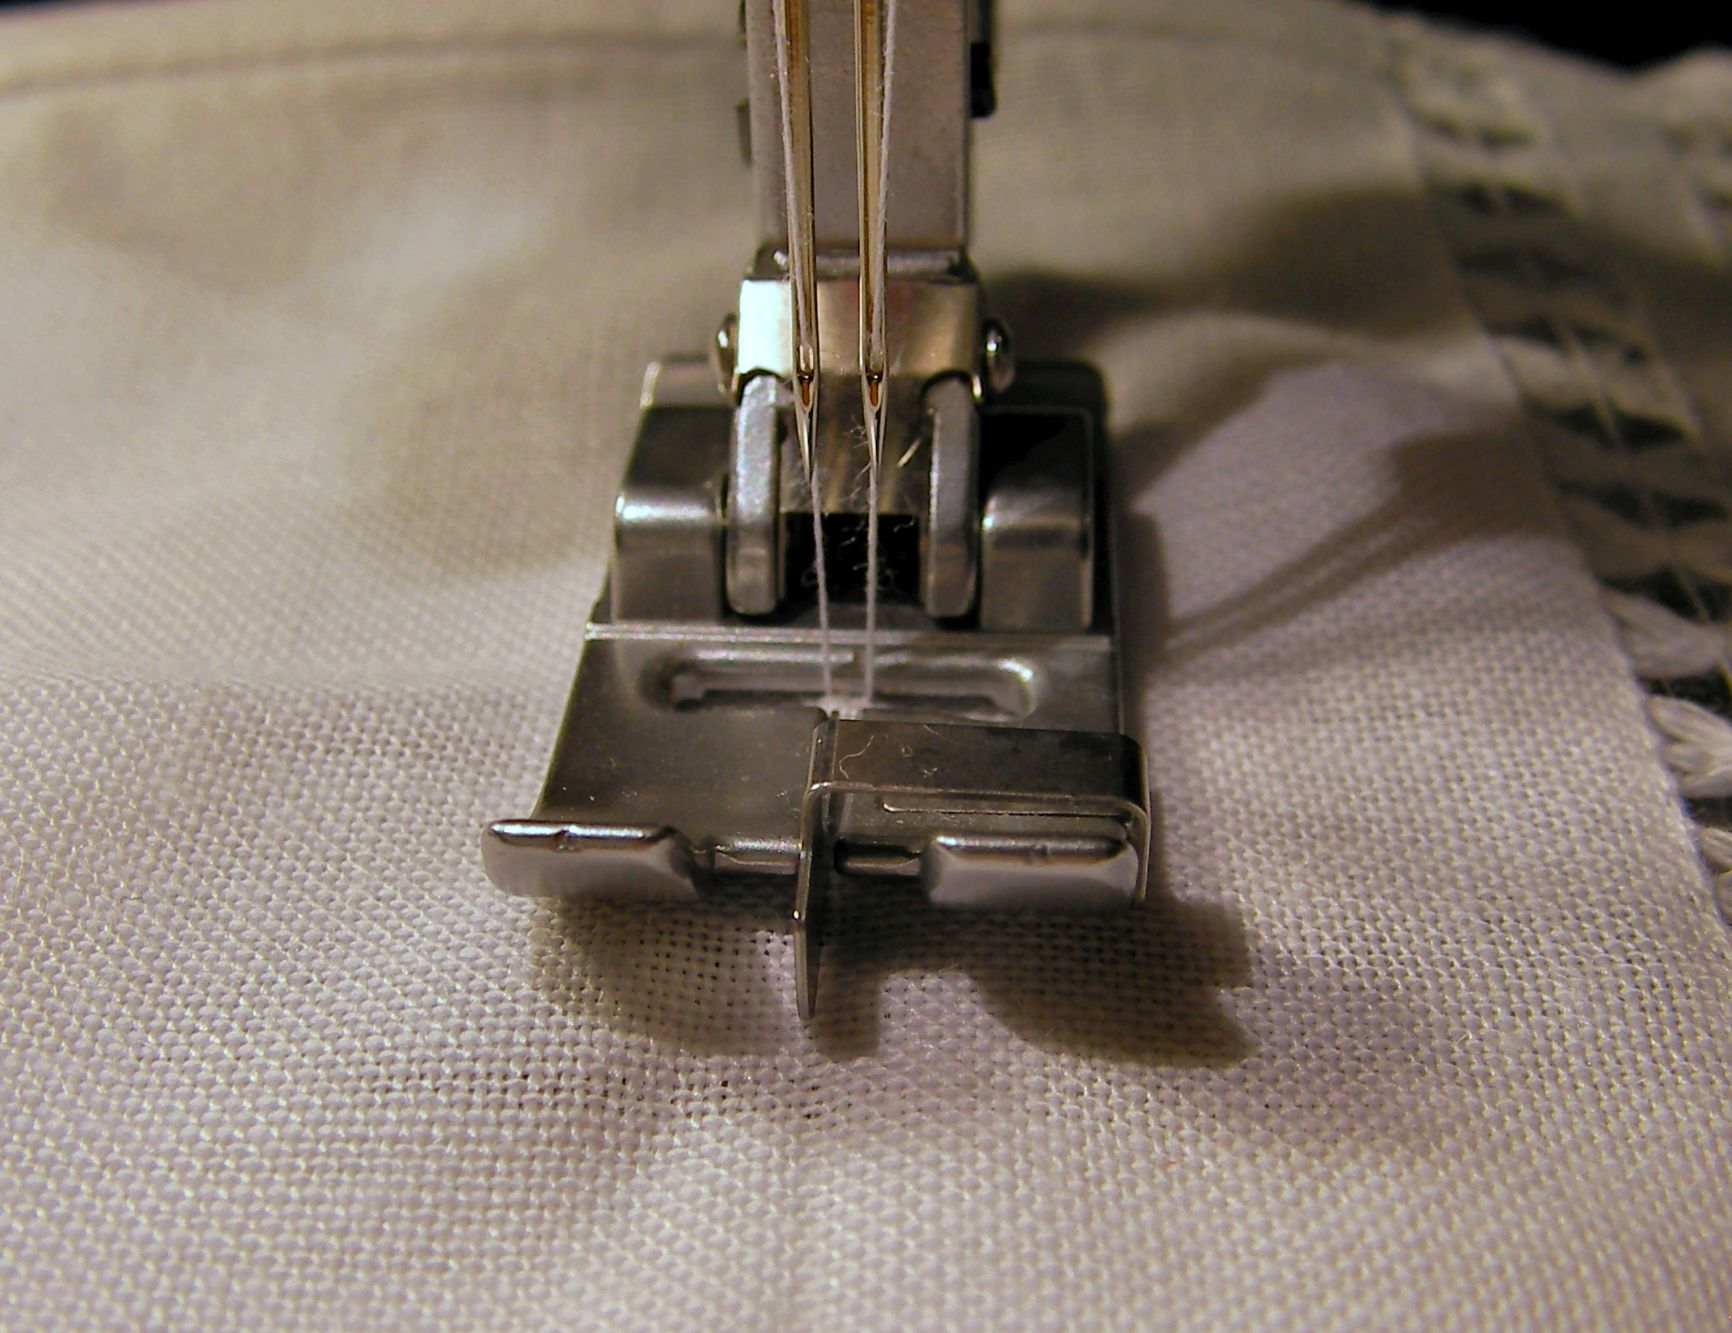 Sewing the first pintuck